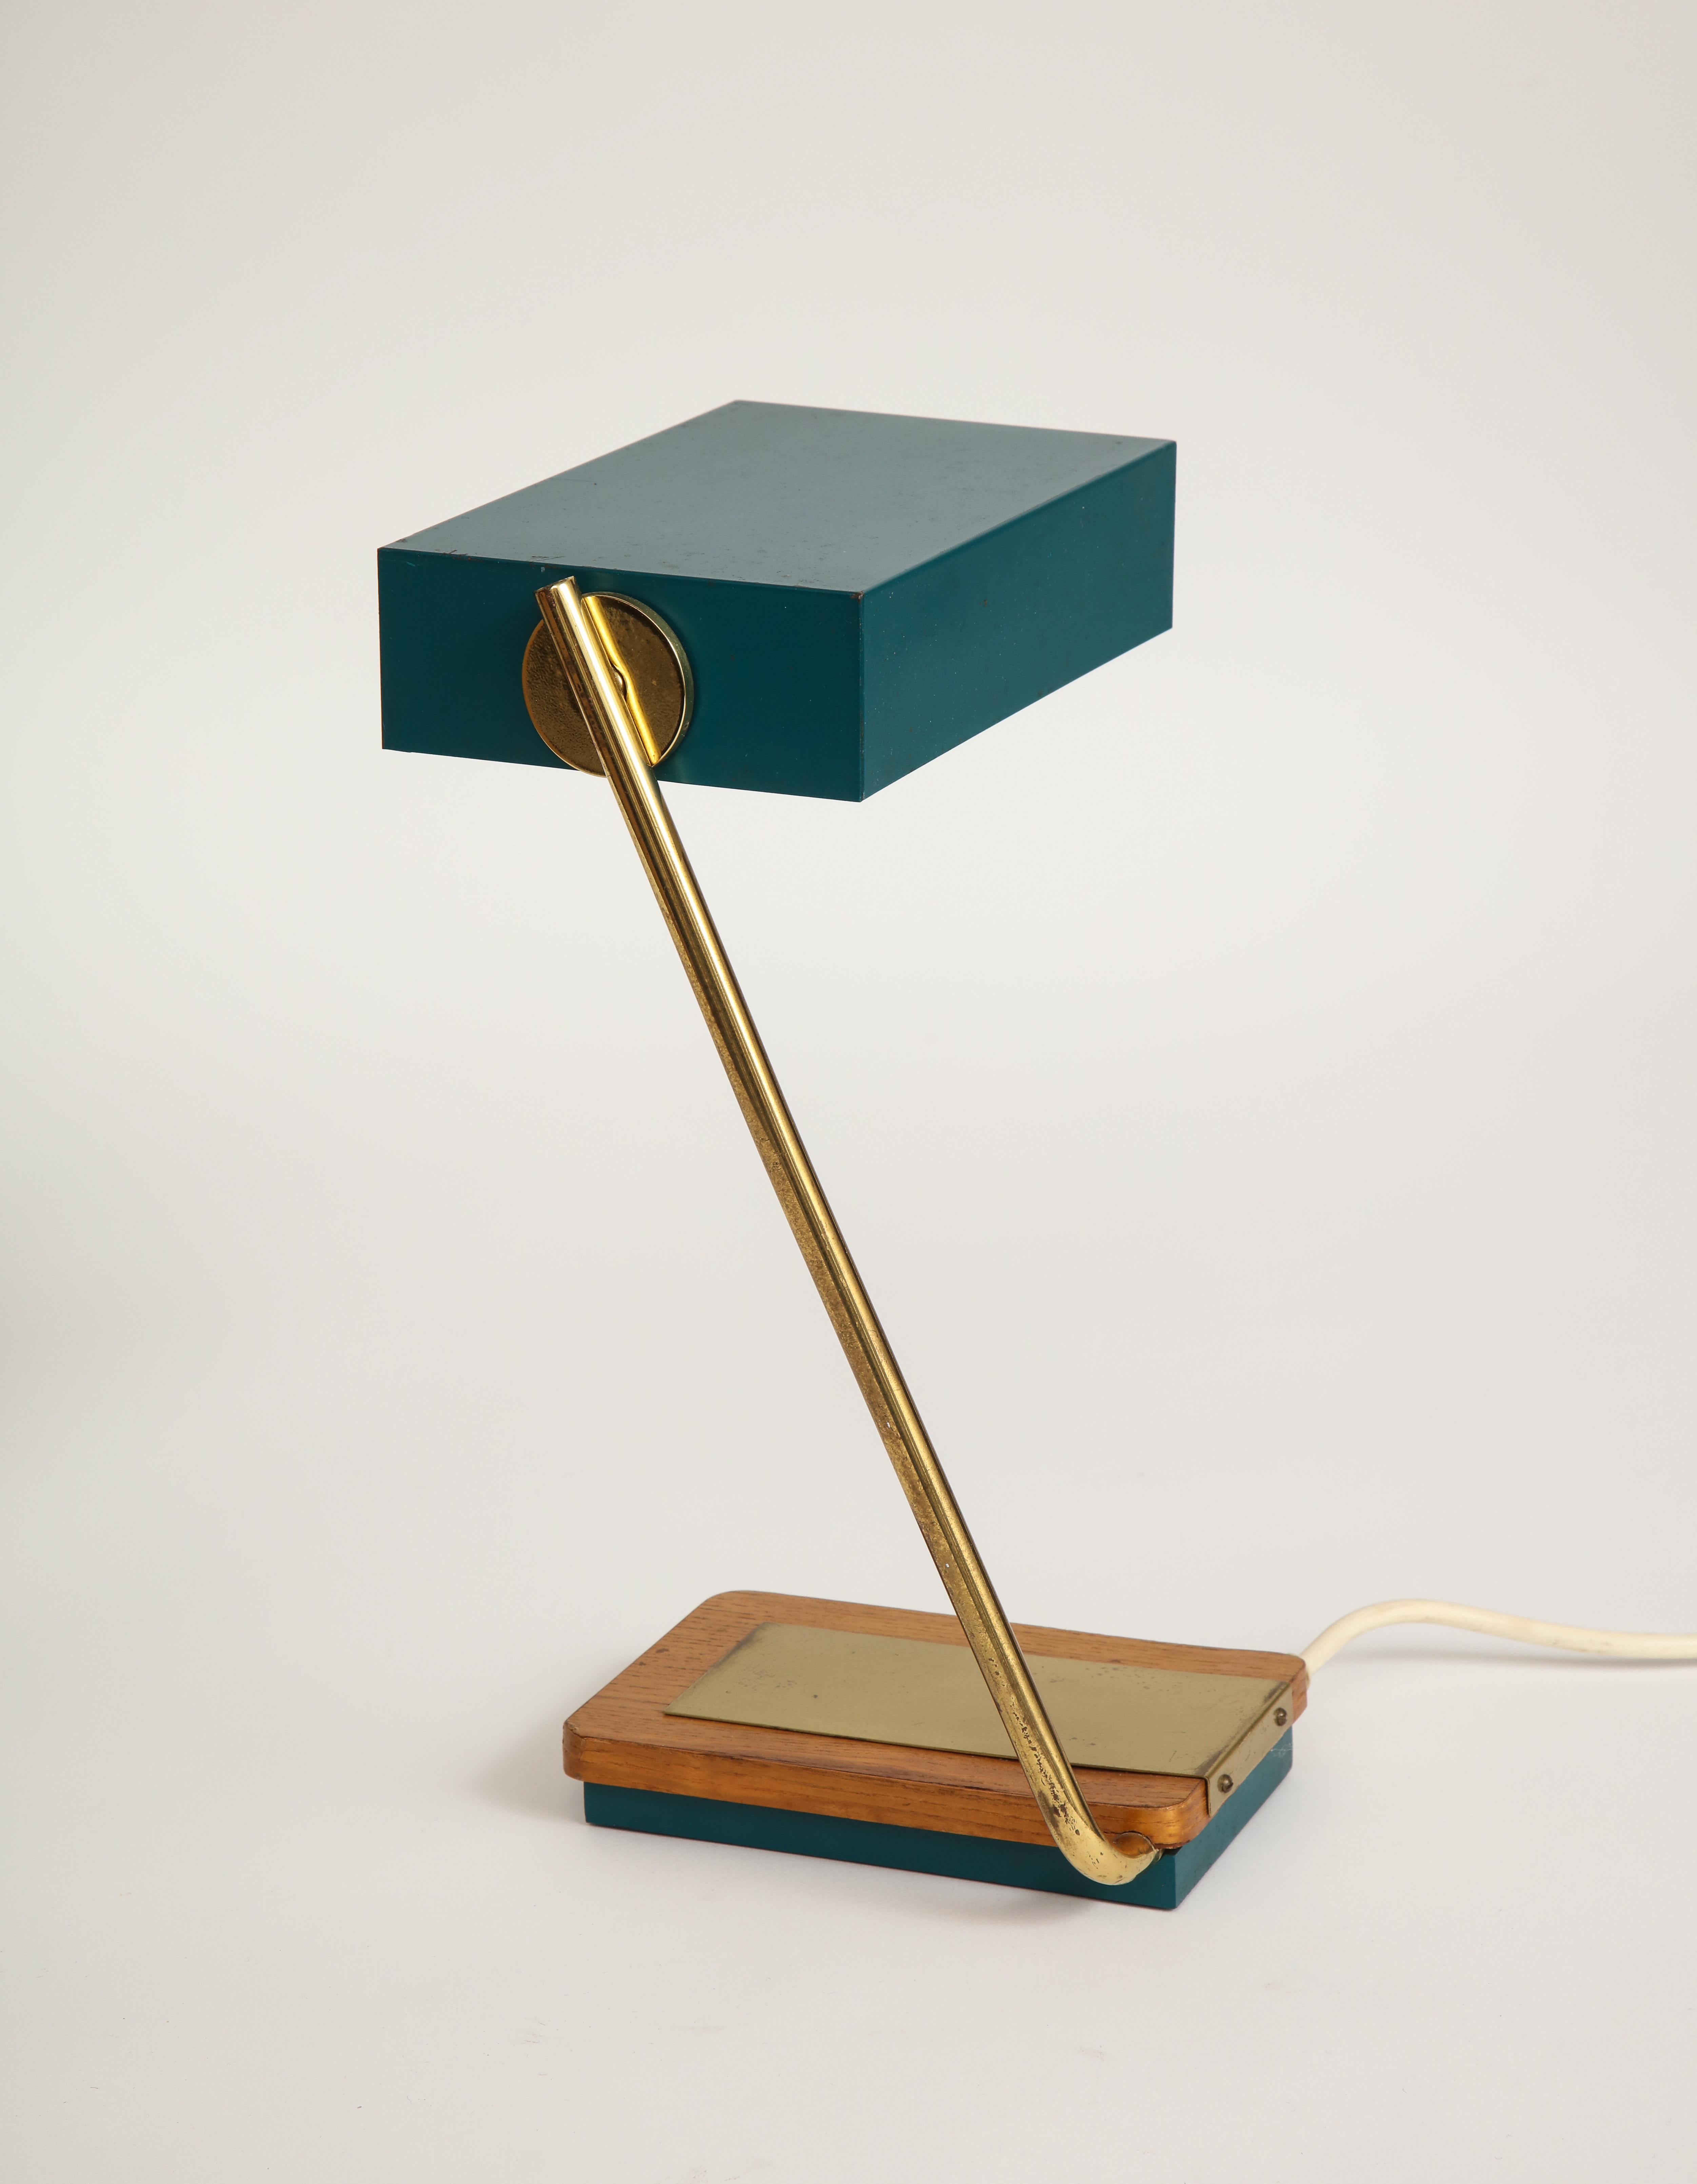 Painted Small Vintage Desk Lamp with Green Metal Shade